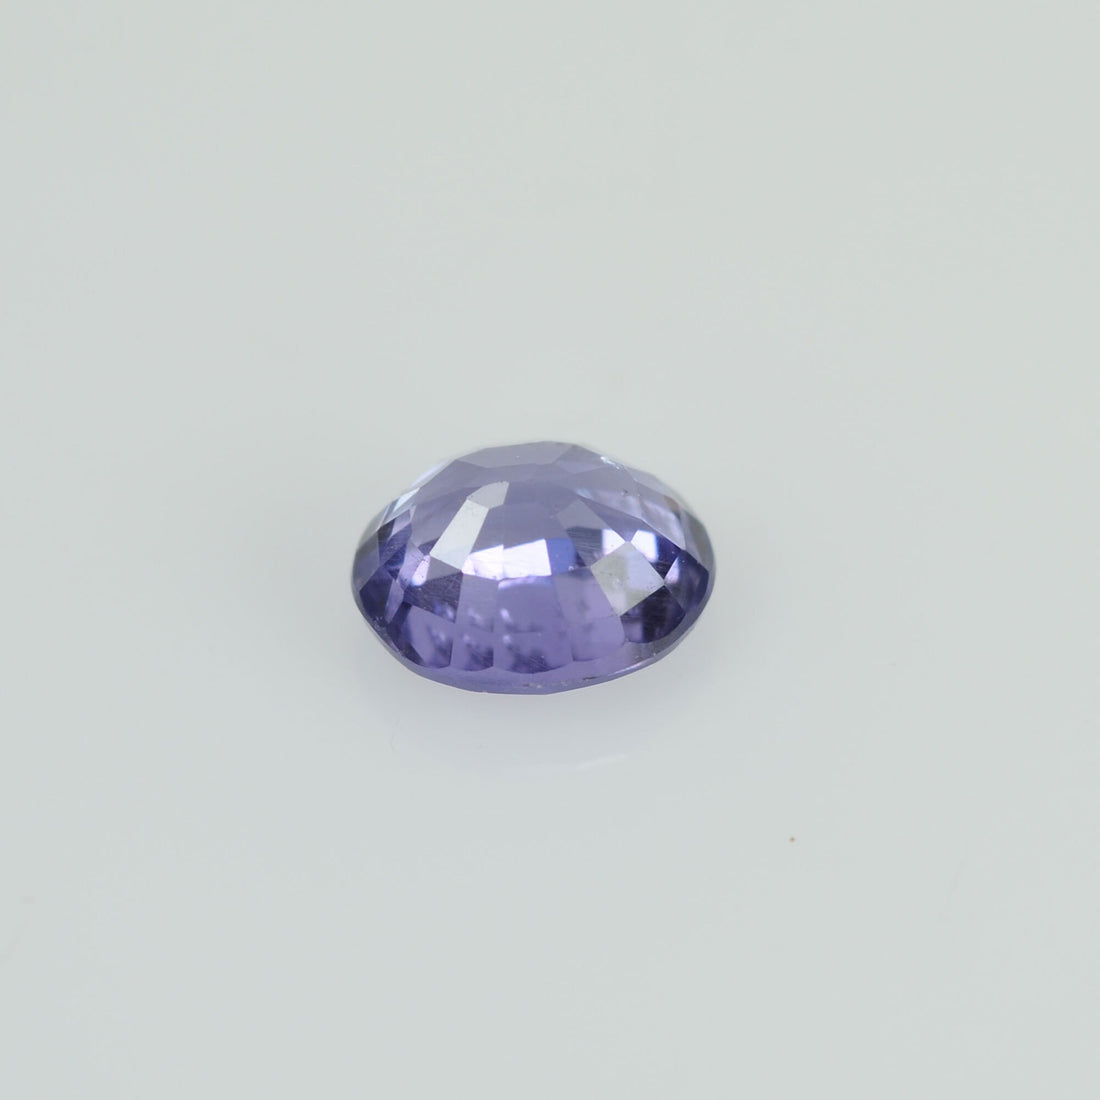 0.39 cts Natural Lavender Sapphire Loose Gemstone Oval Cut